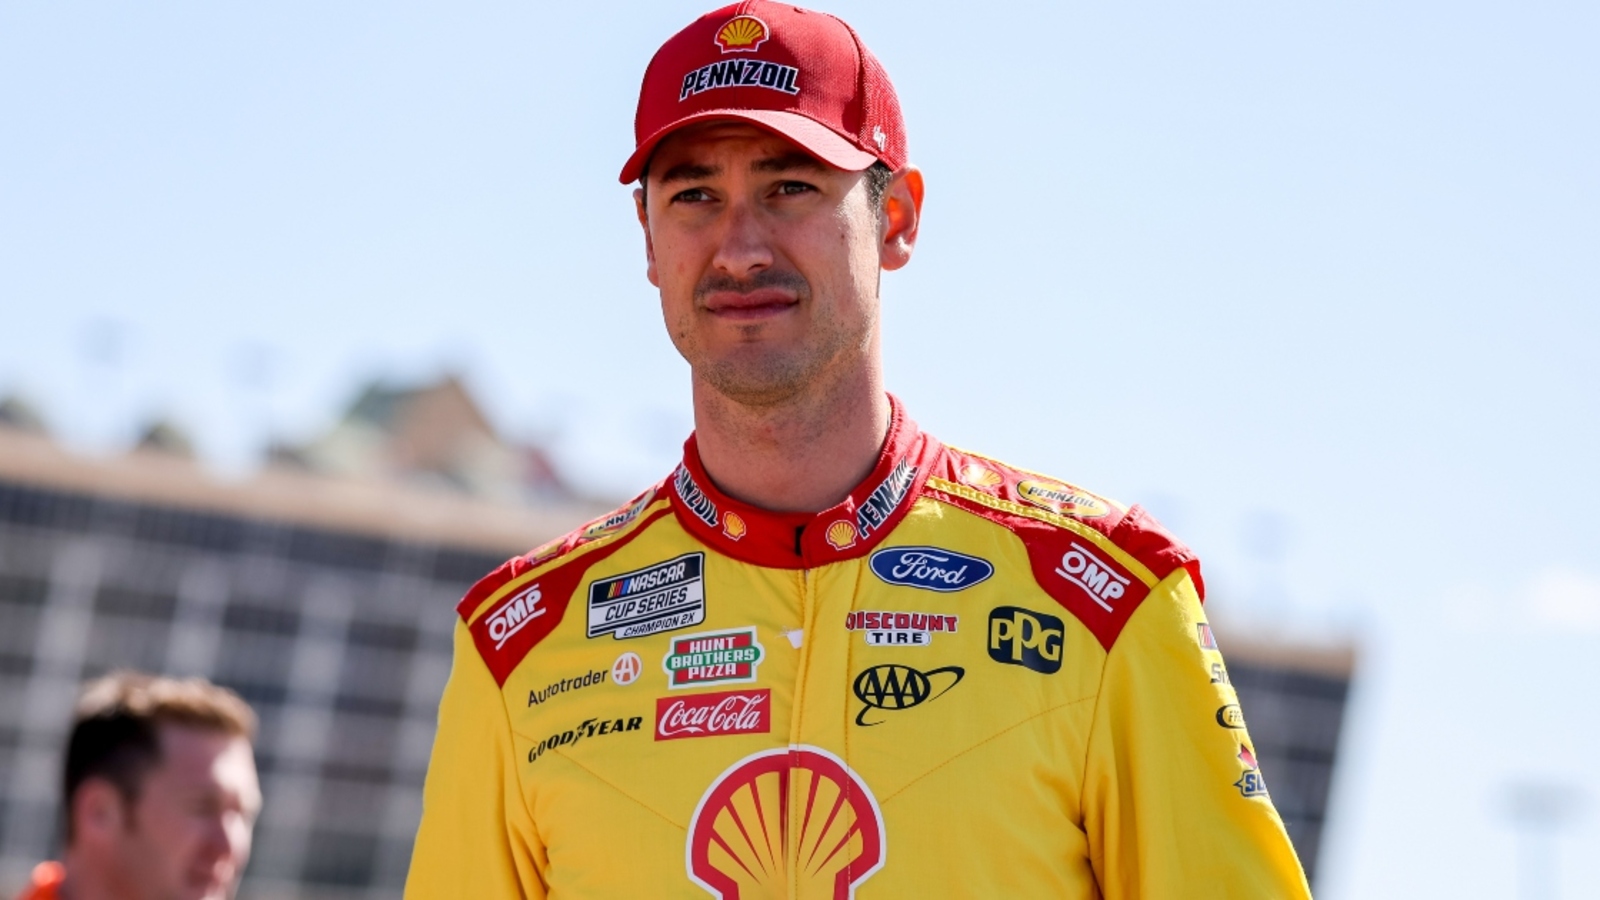 Joey Logano serving pass-through penalty to start Ambetter Health 400 due to unapproved gloves